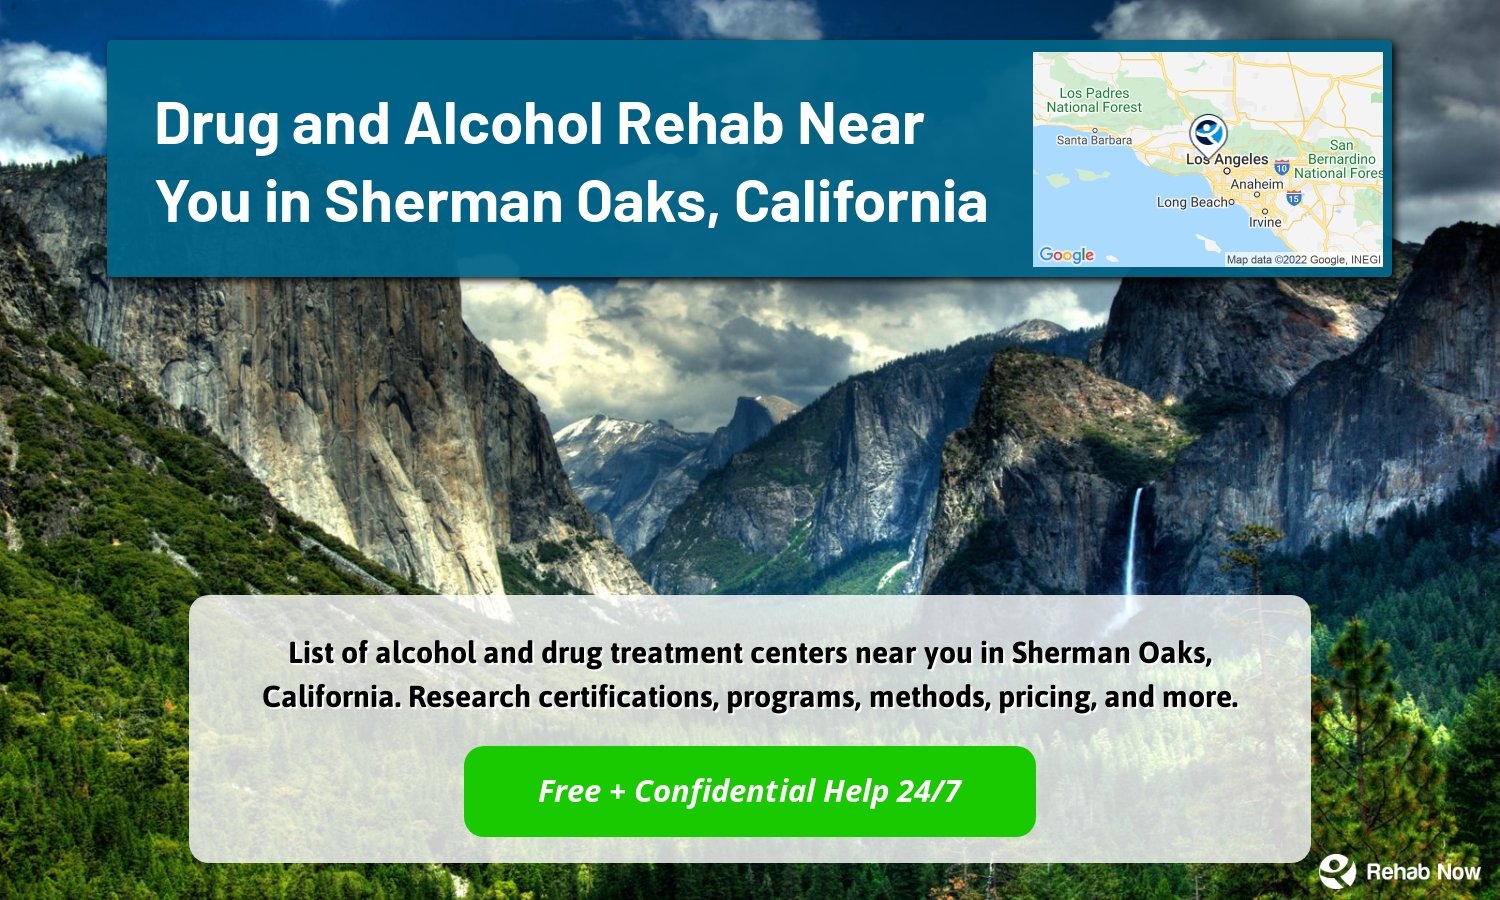 List of alcohol and drug treatment centers near you in Sherman Oaks, California. Research certifications, programs, methods, pricing, and more.